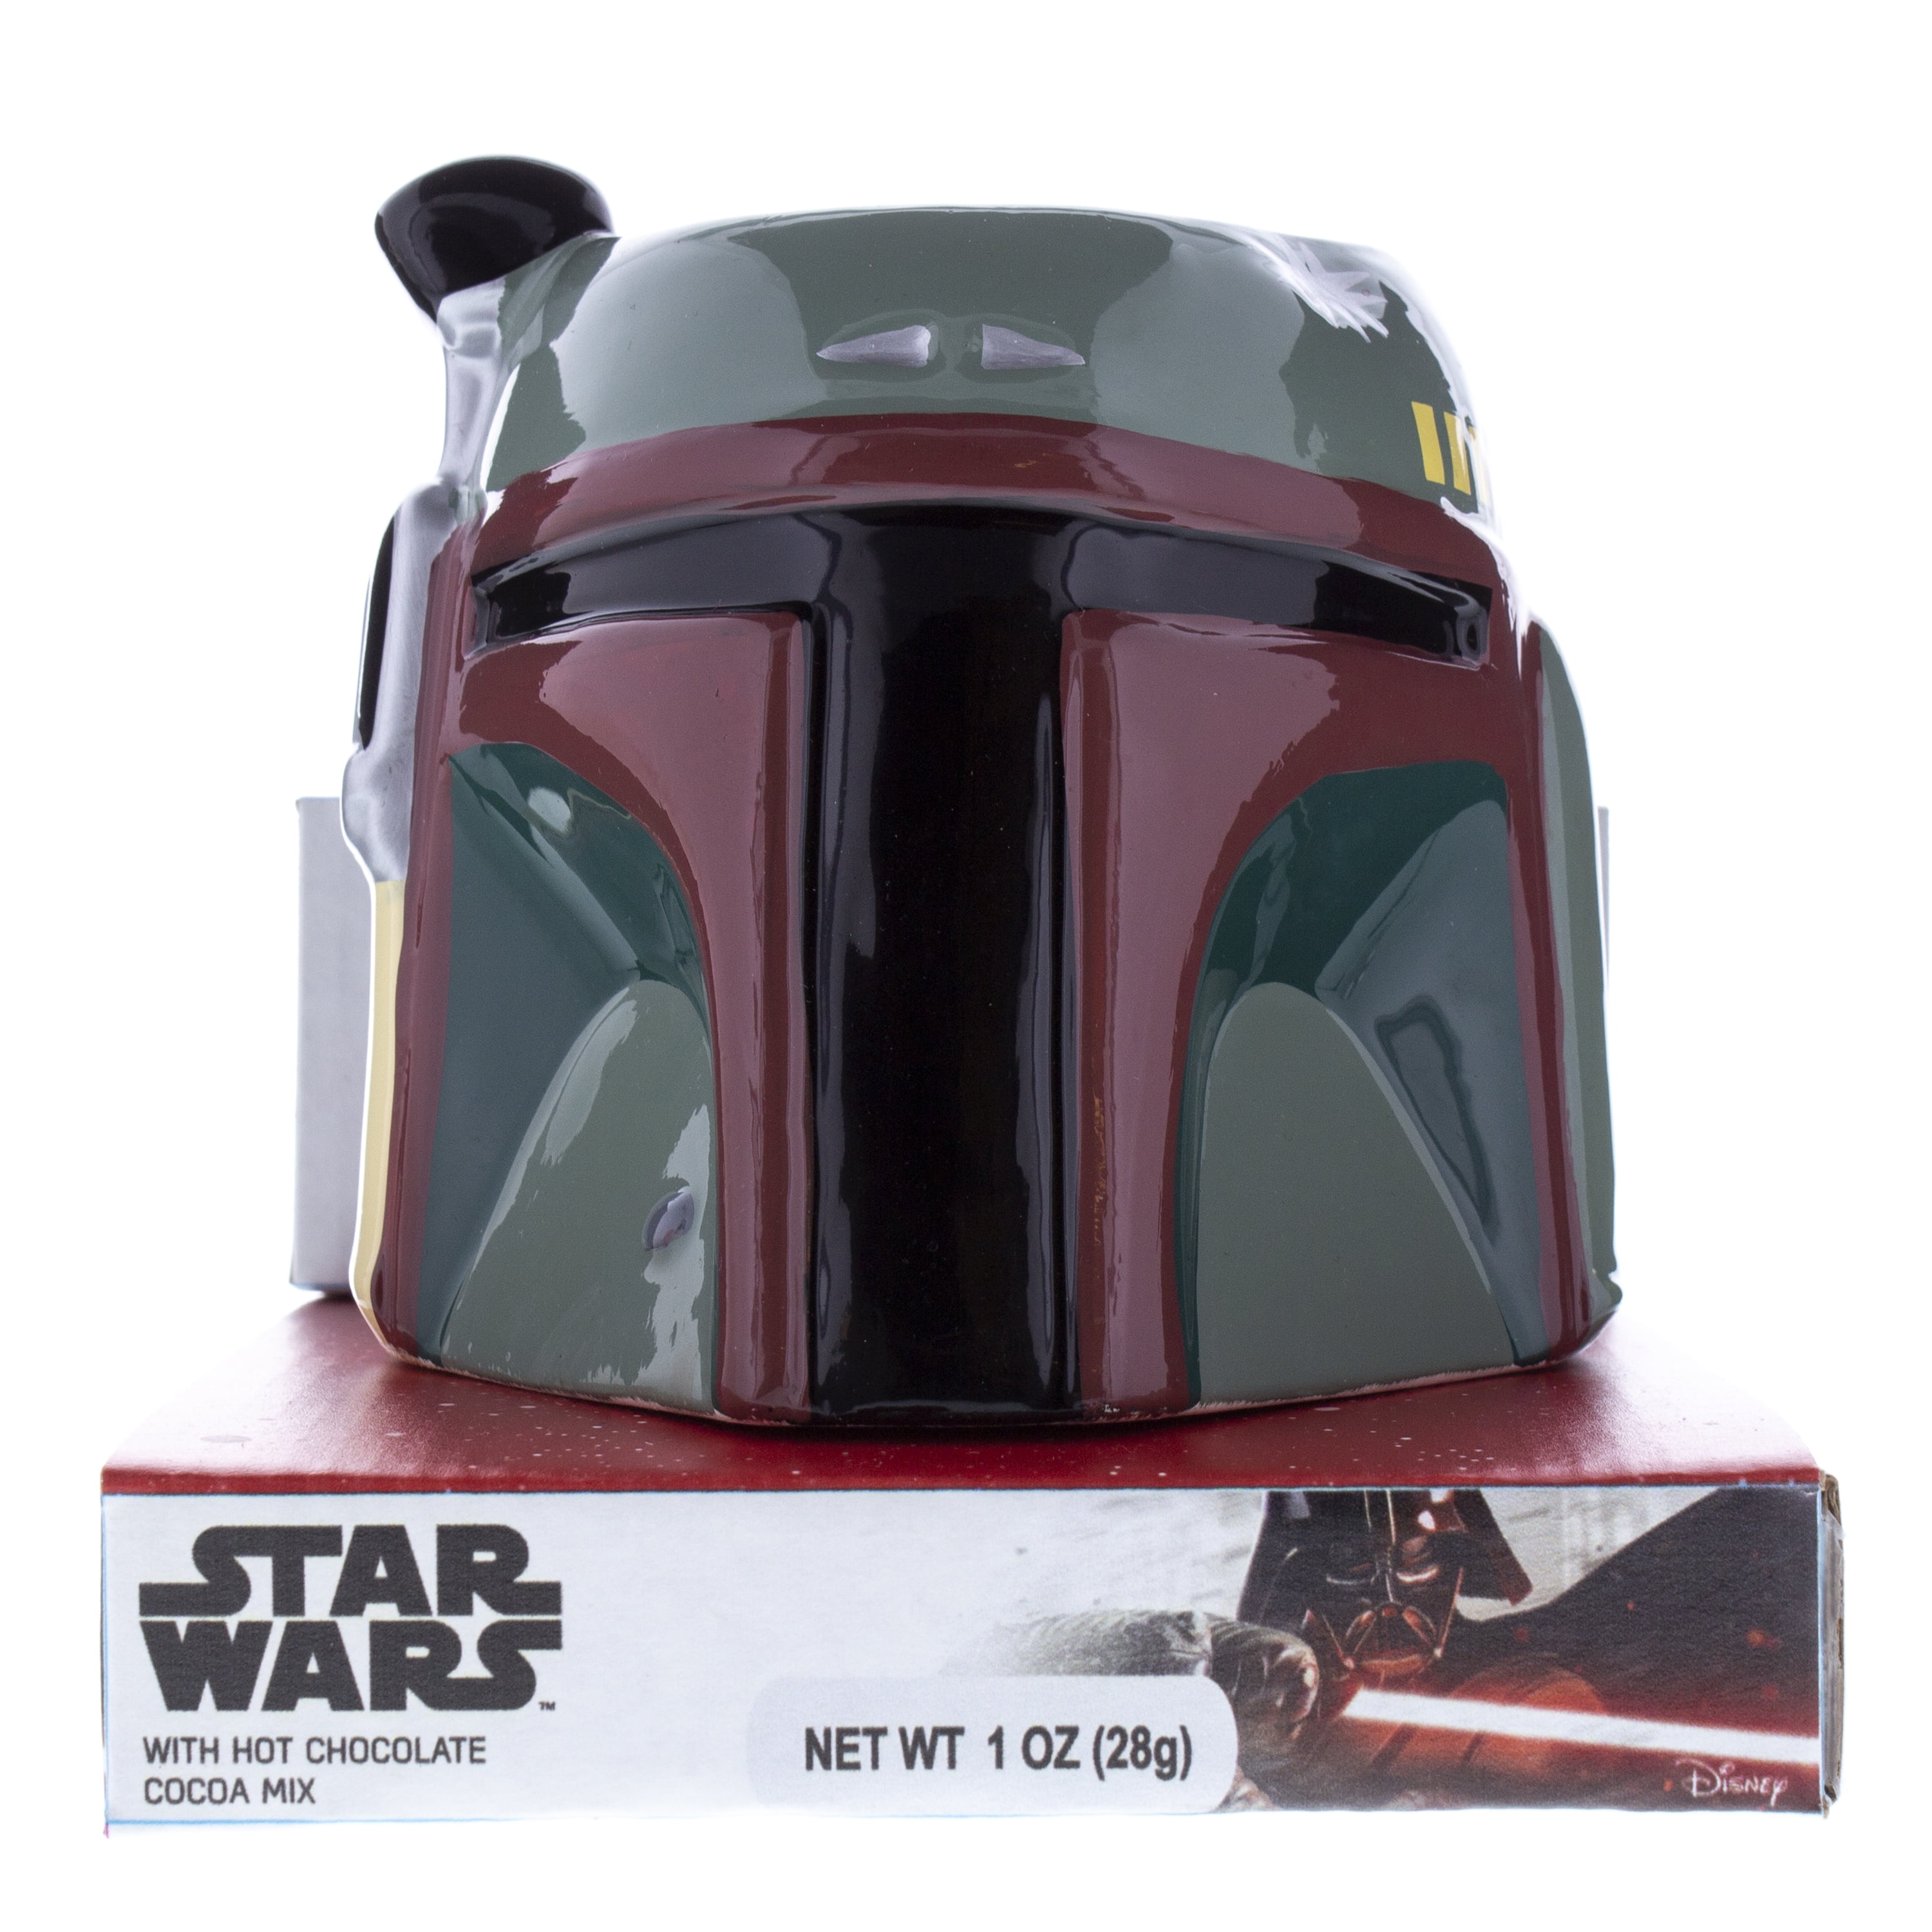 Galerie Star Wars Heroes And Villains 6 Mug Gift Set With Hot Chocolate  Cocoa Mix - Boba Fett Collectibles - Boba Fett Fan Club